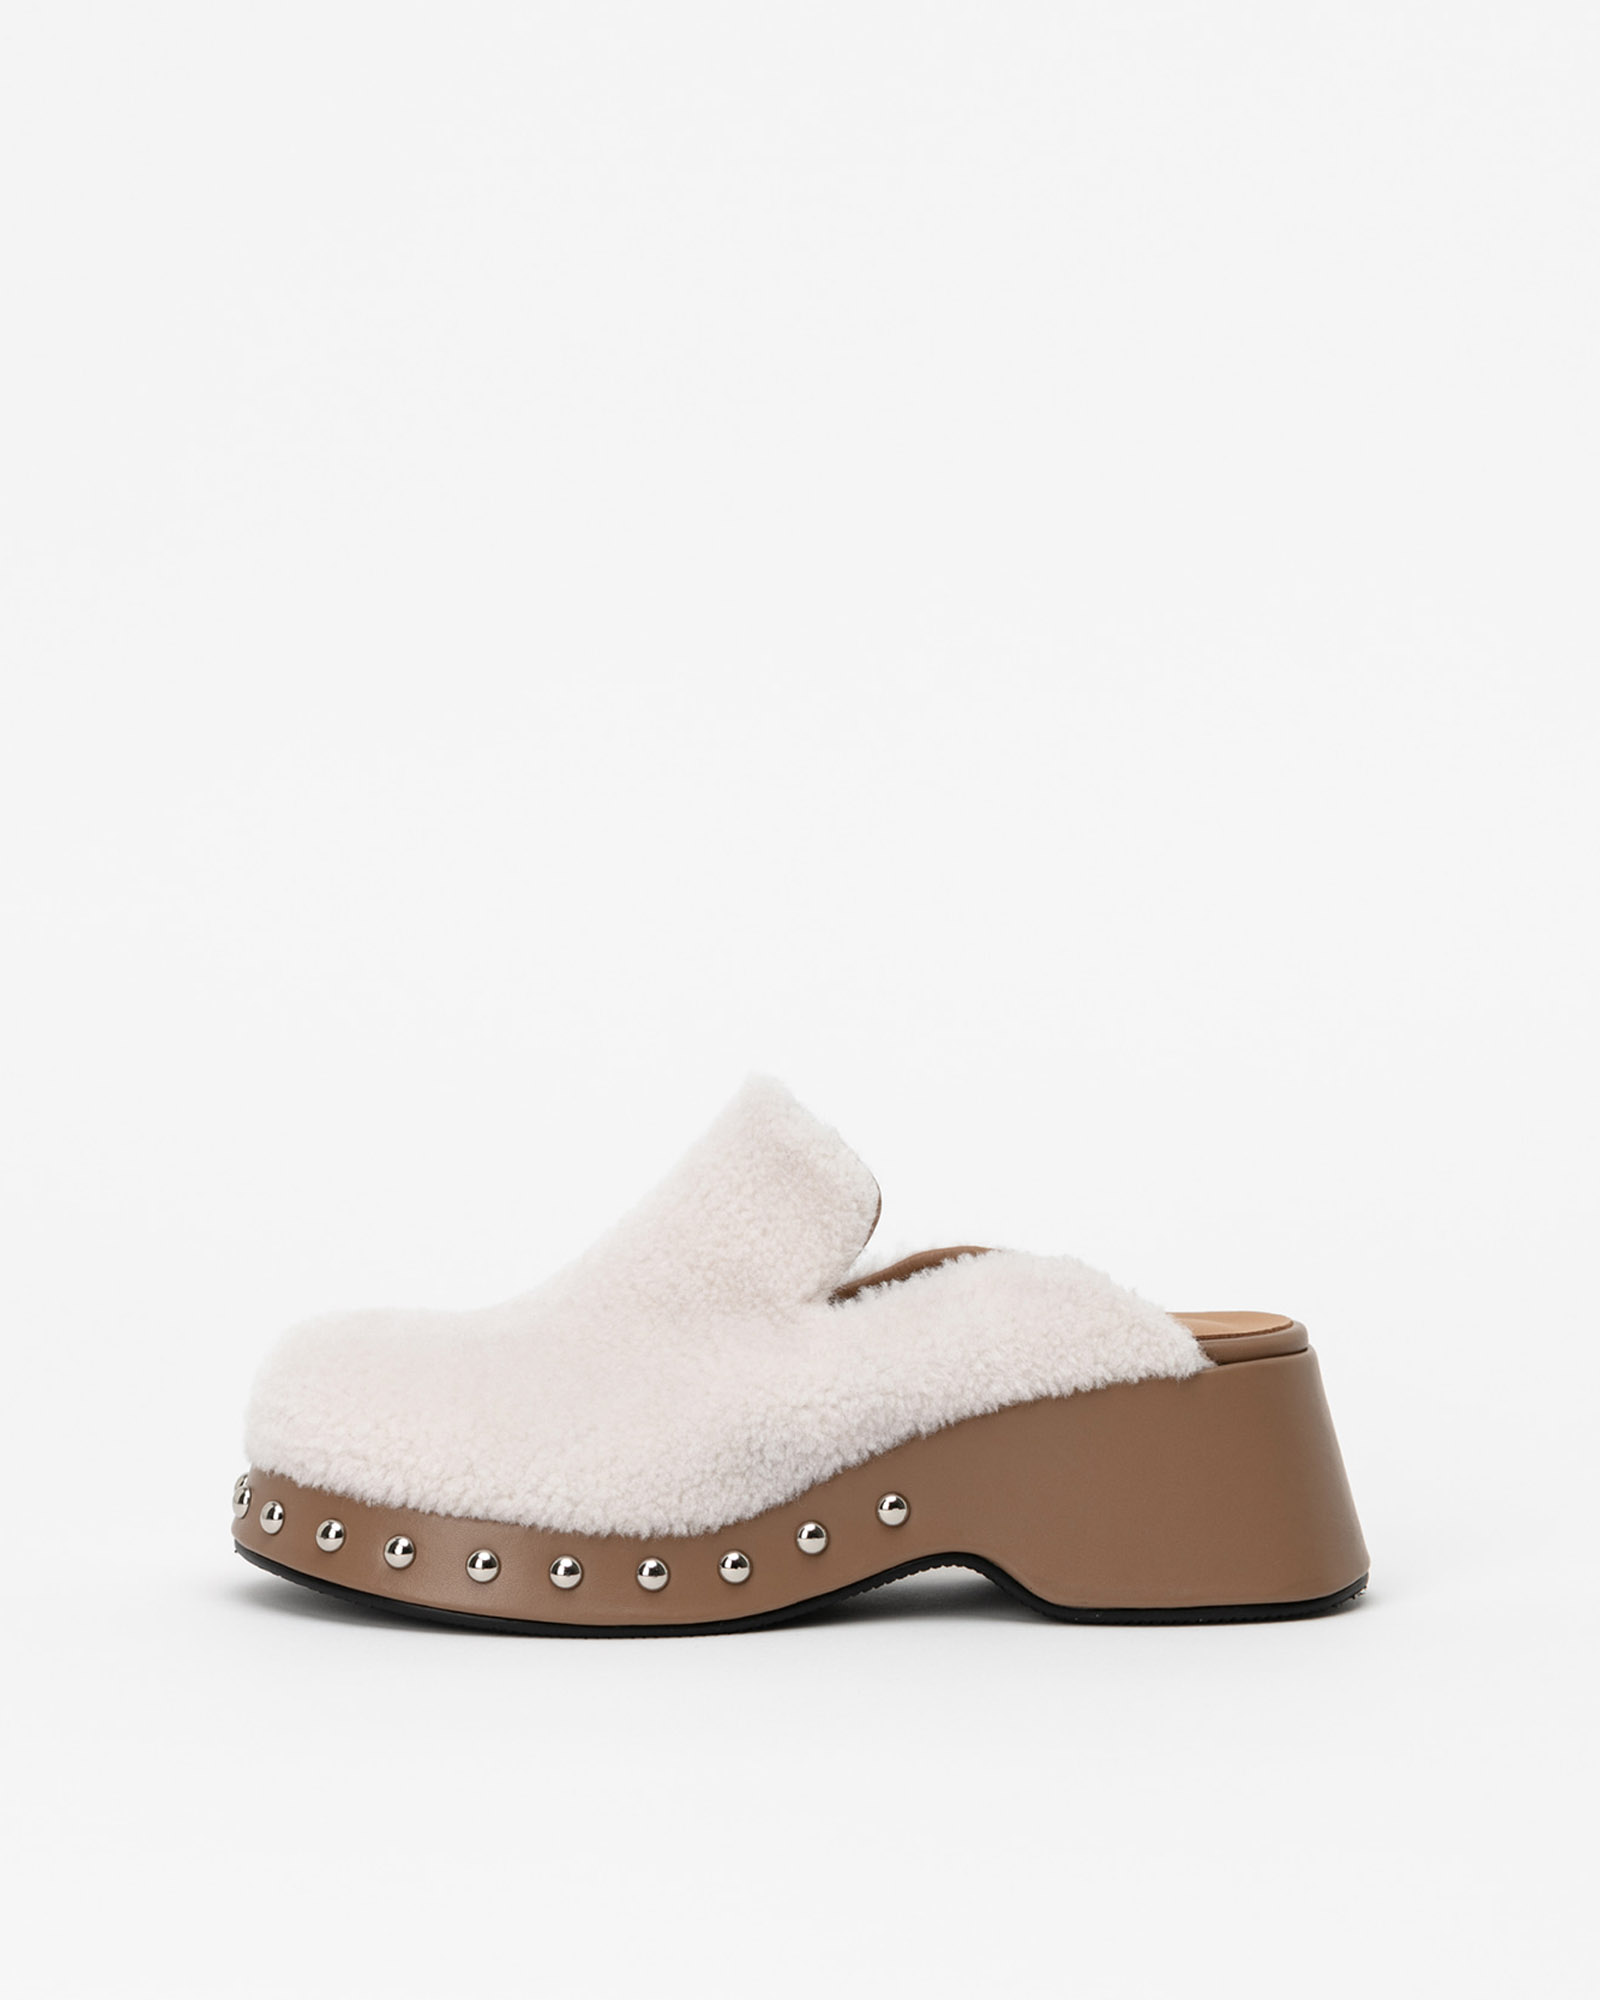 Brioso Shearling Clog Mules in Ivory Fur with Acorn Beige